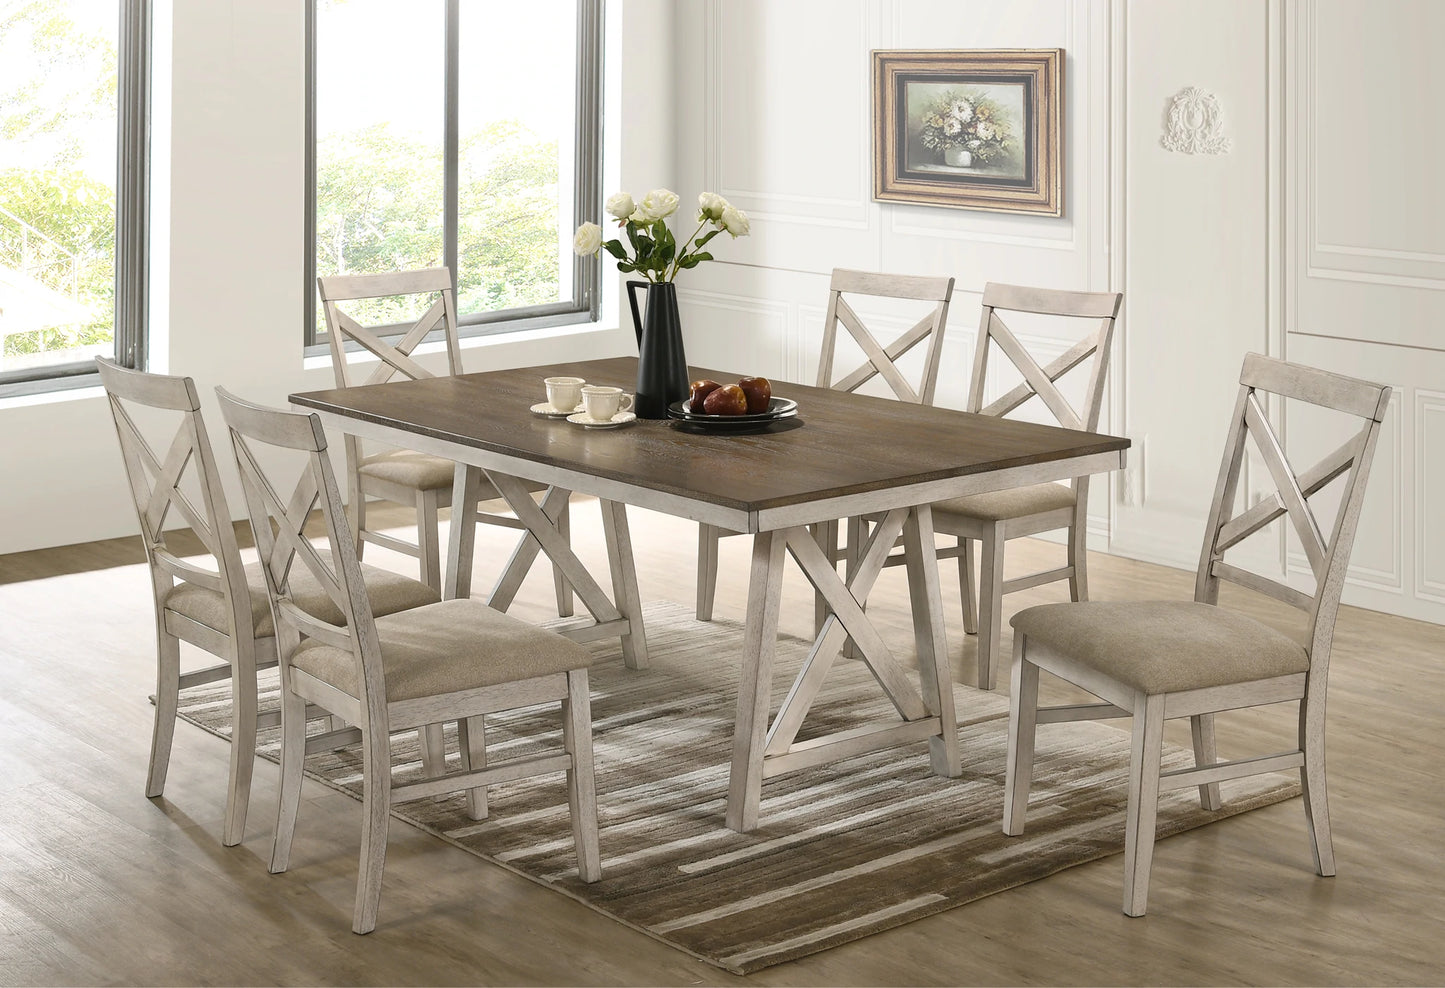 Summer Dining Table & Chairs